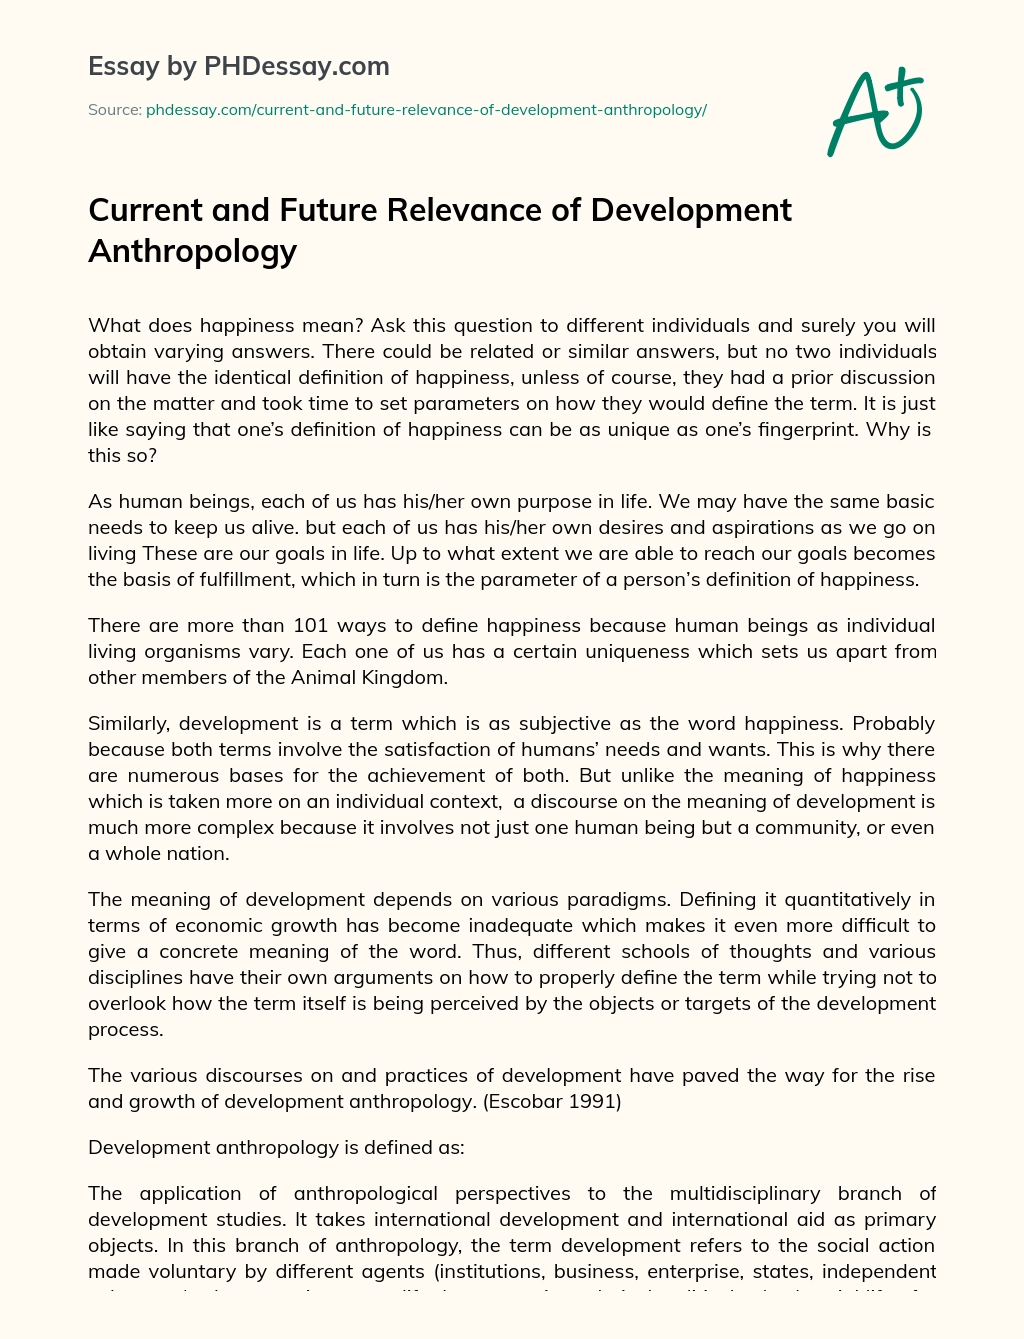 Current and Future Relevance of Development Anthropology essay